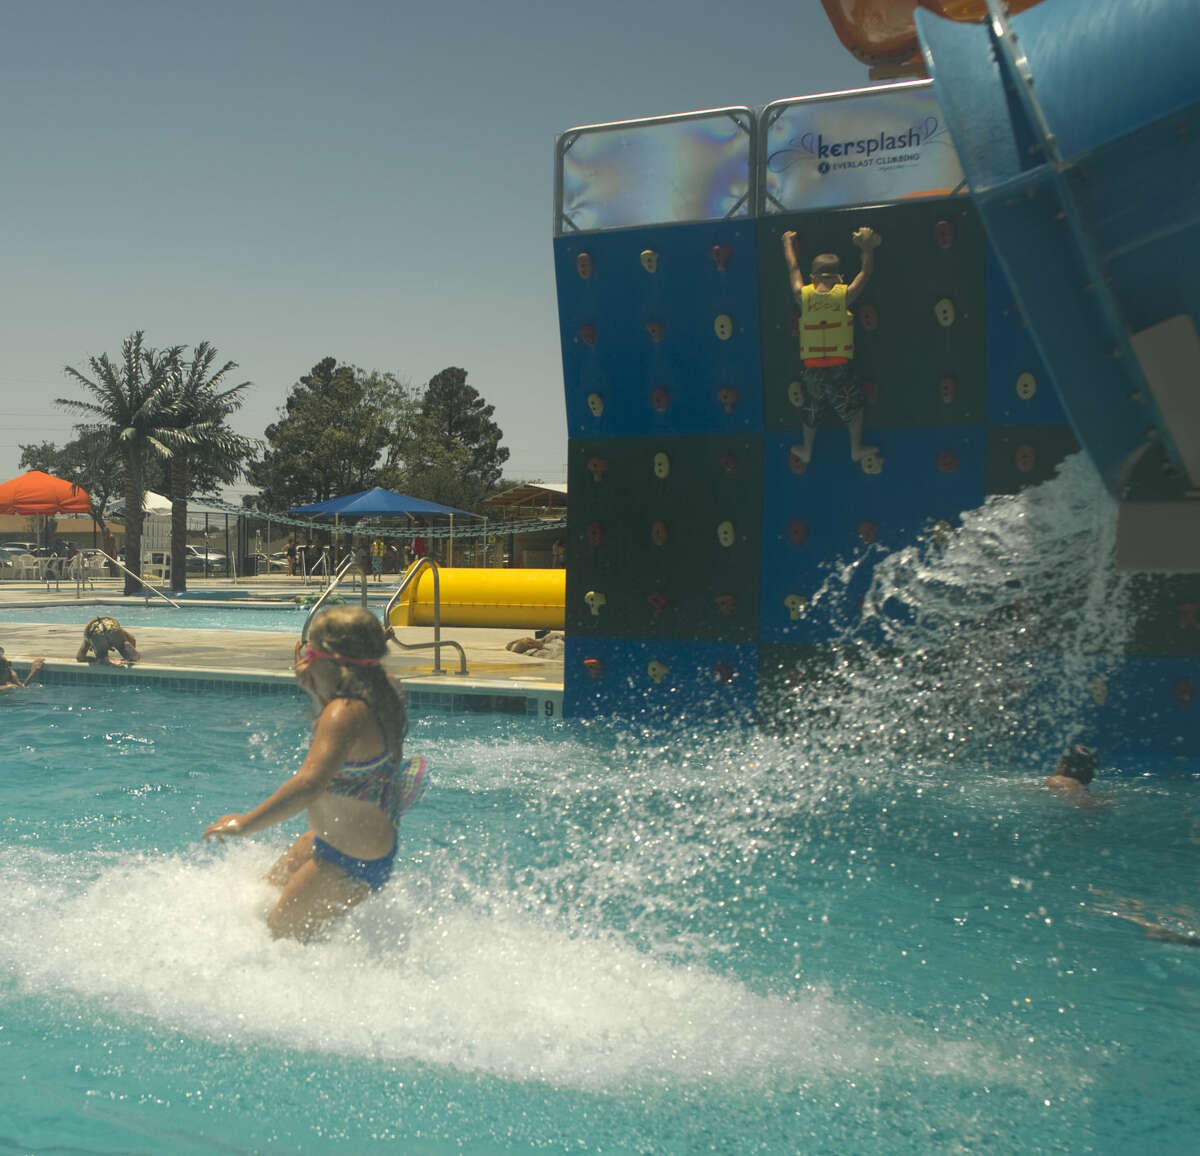 Doug Russell Aquatic Center, 900 Midland Drive, will be open noon to 7 p.m. on Monday and Wednesday through Saturday and 1 to 7 p.m. on Sunday.